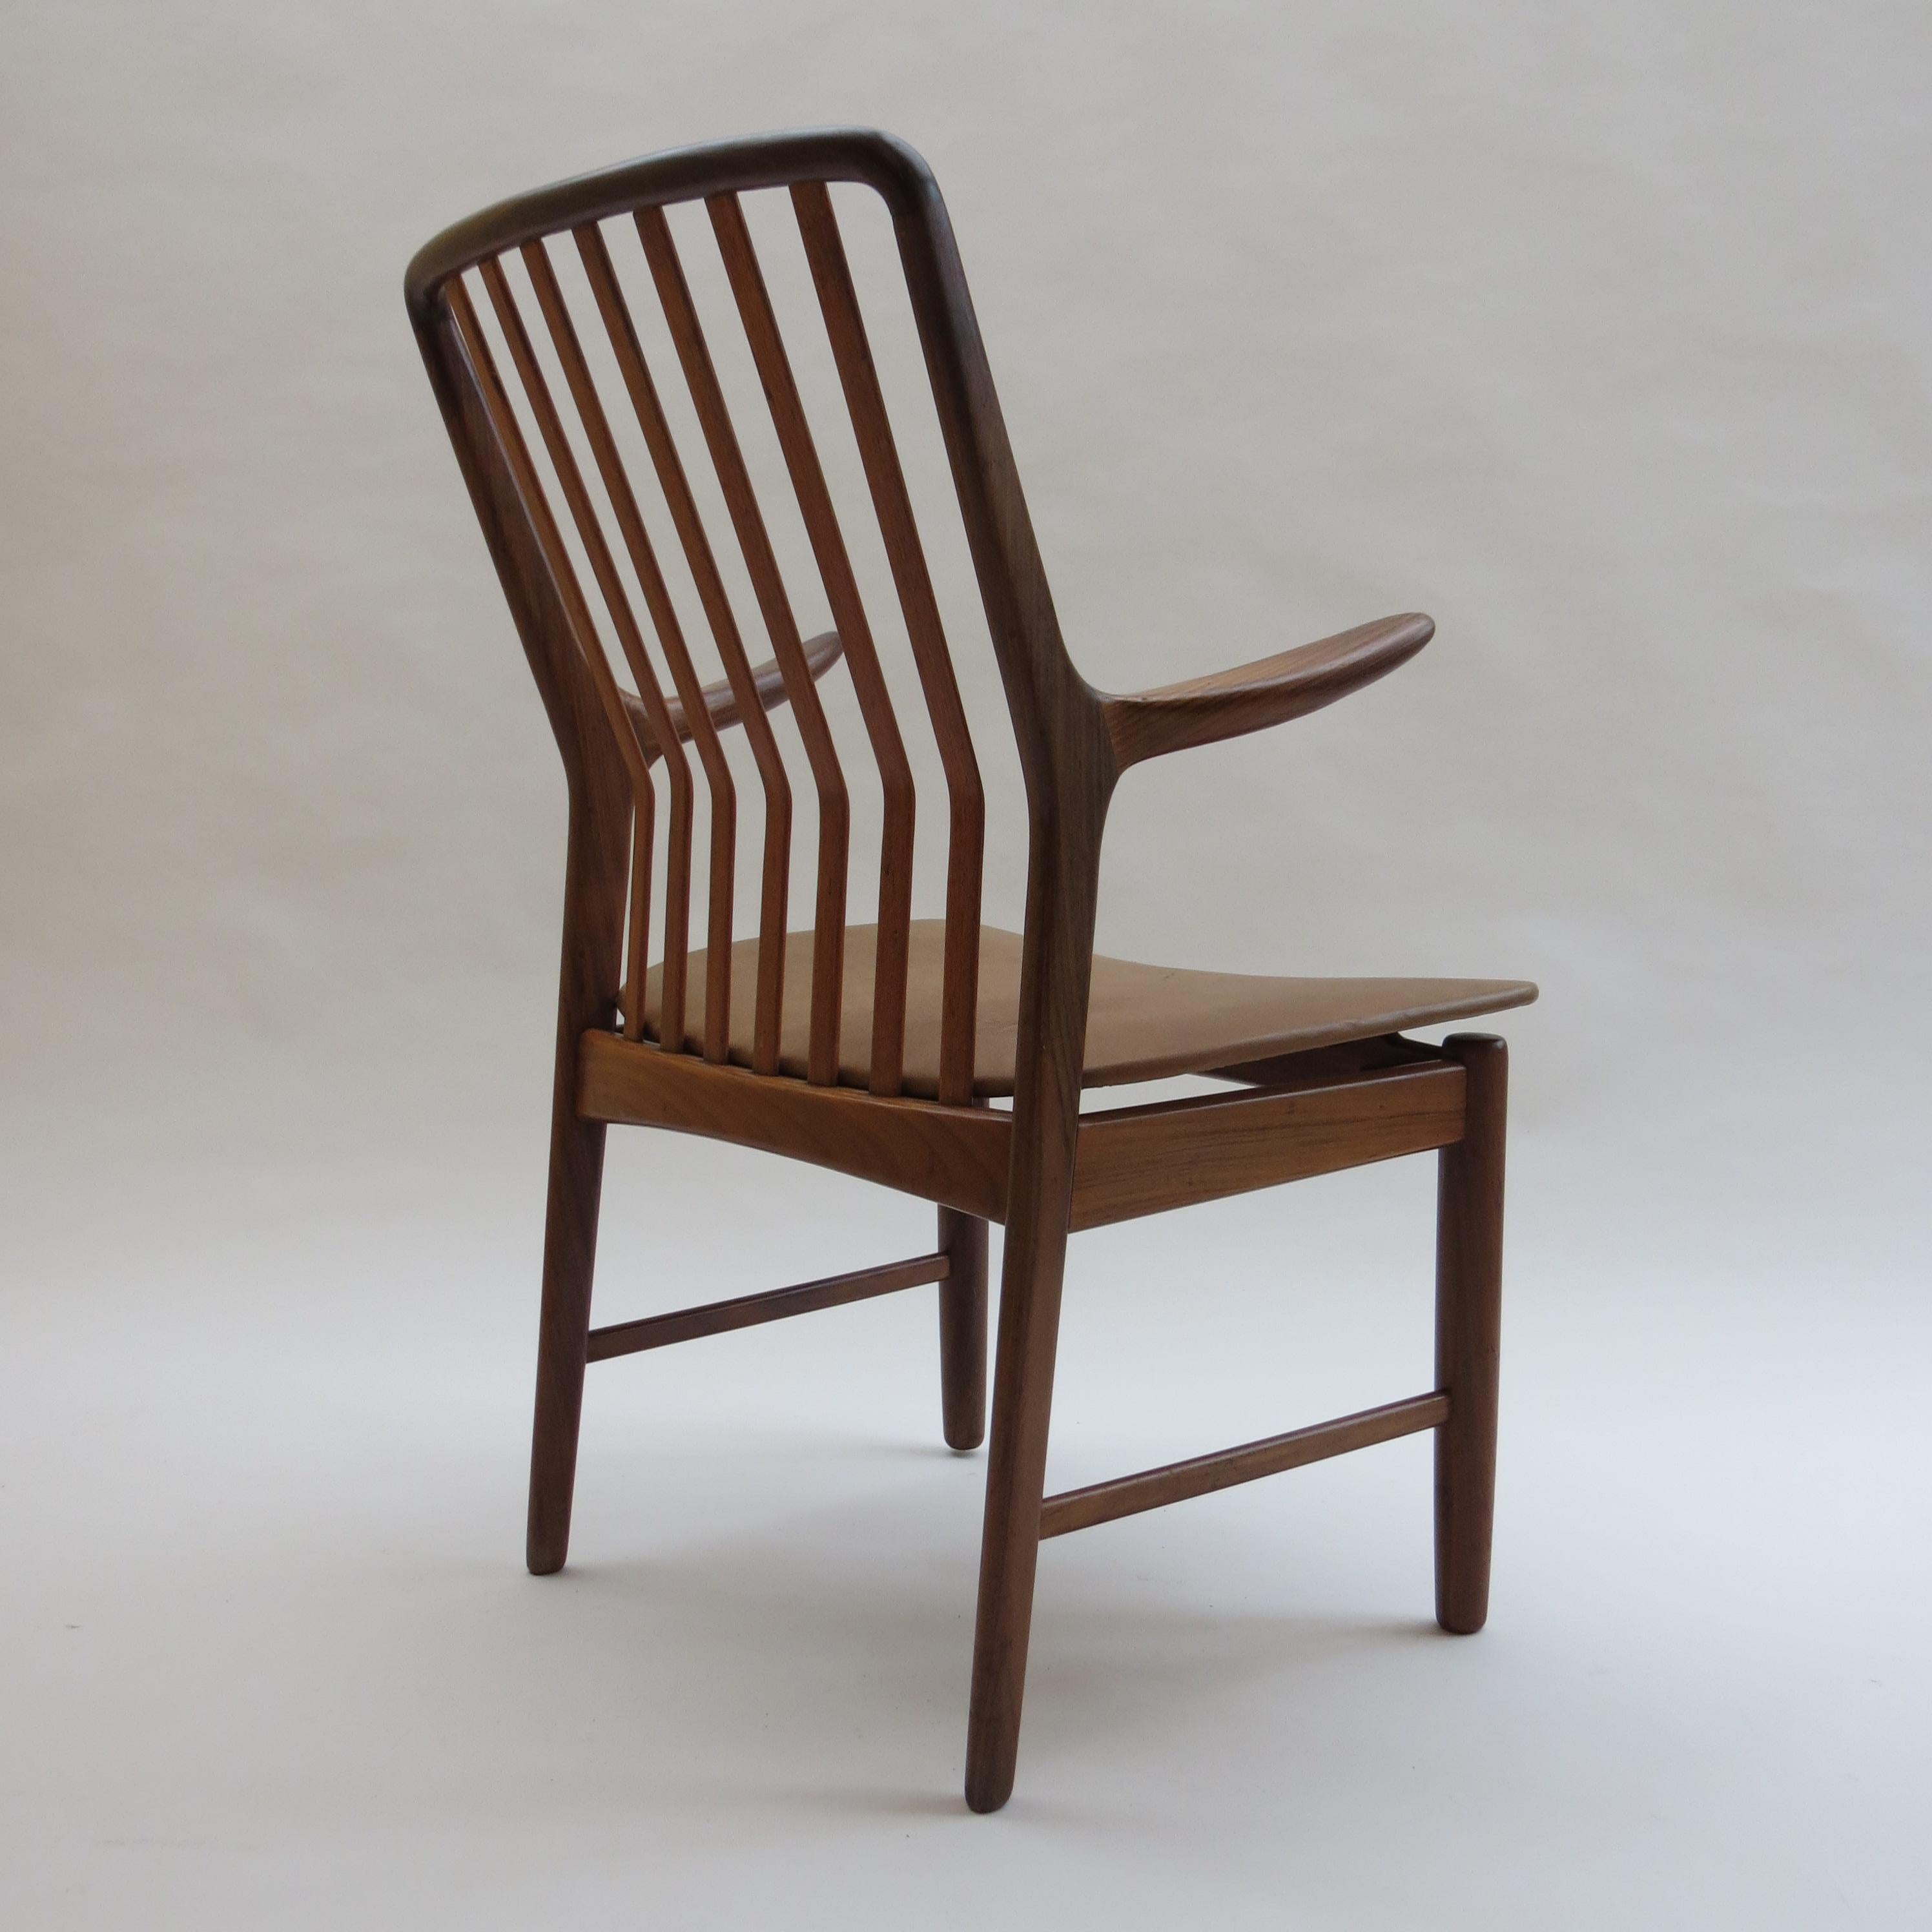 Mid-Century Modern Midcentury Danish Chair by Svend Madsen 1960s with Brown Leather Seat